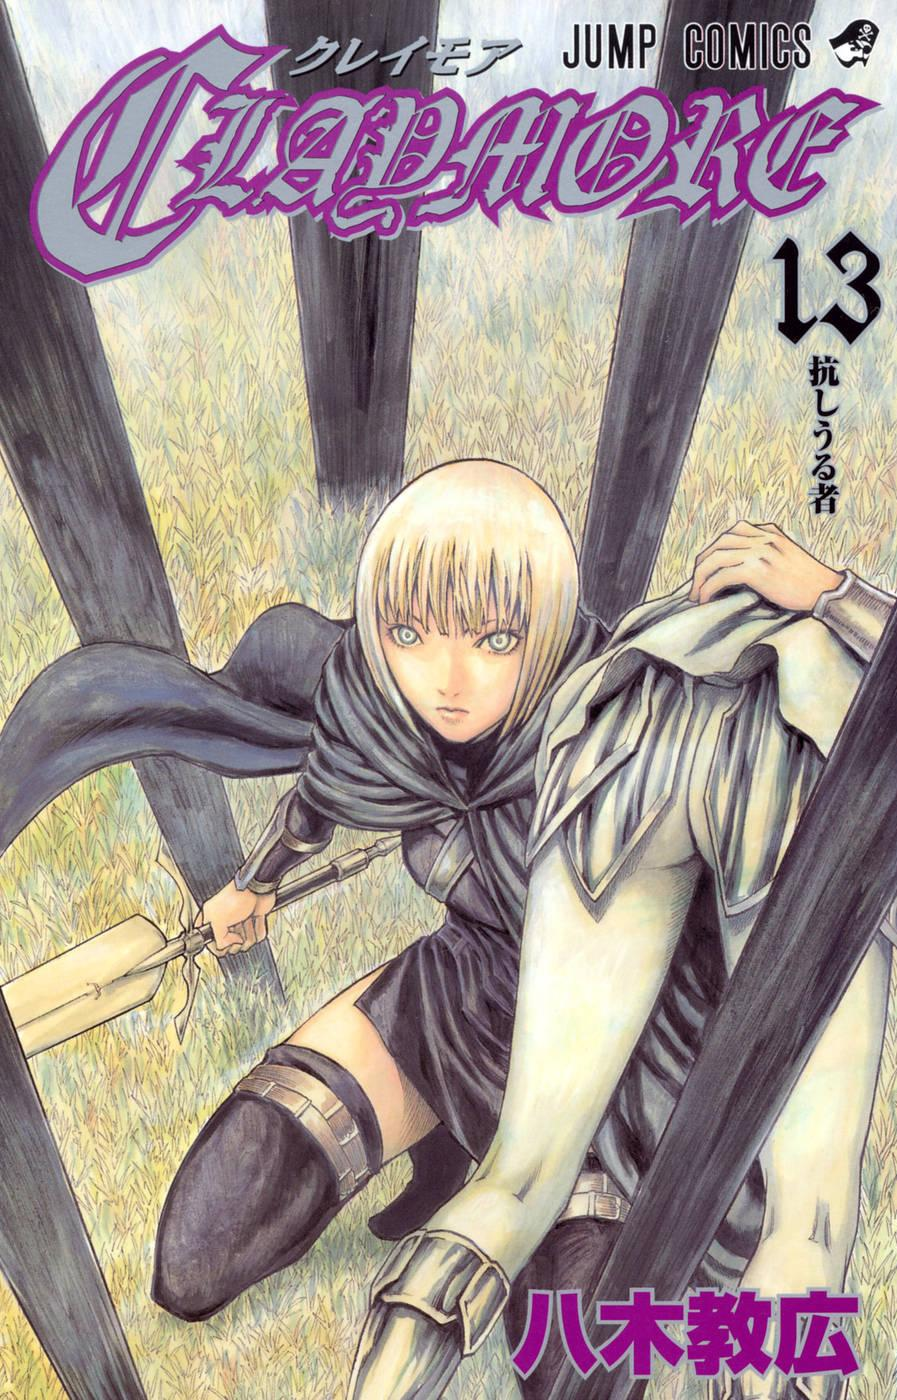 http://img3.wikia.nocookie.net/__cb20110402201609/claymore/es/images/0/0b/Tomo_13.png